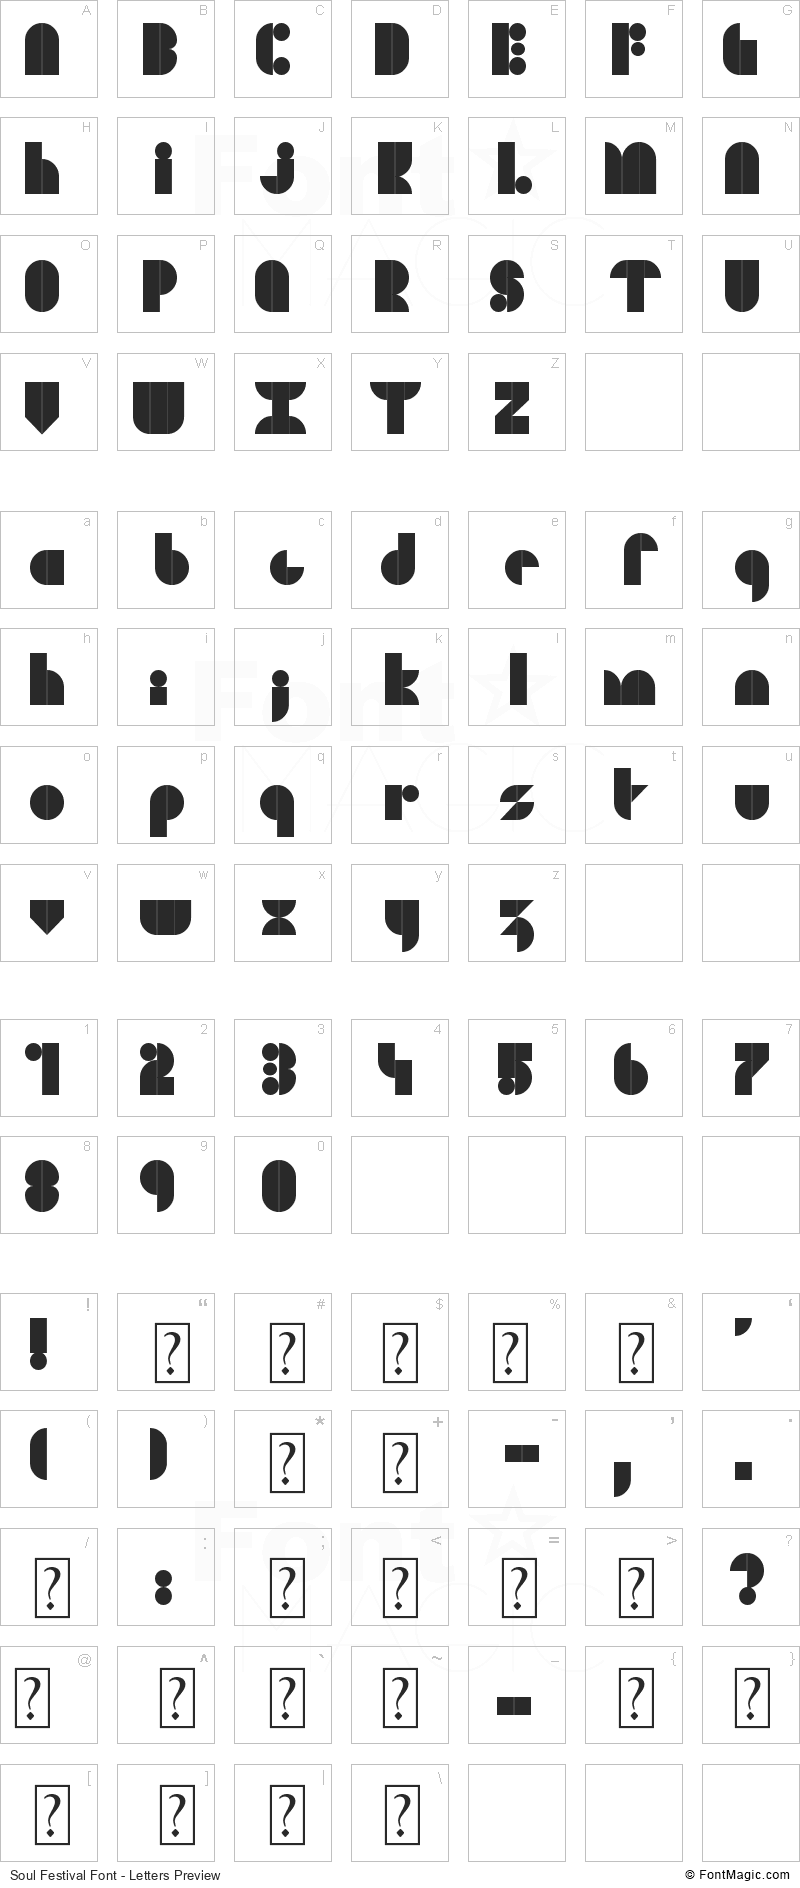 Soul Festival Font - All Latters Preview Chart